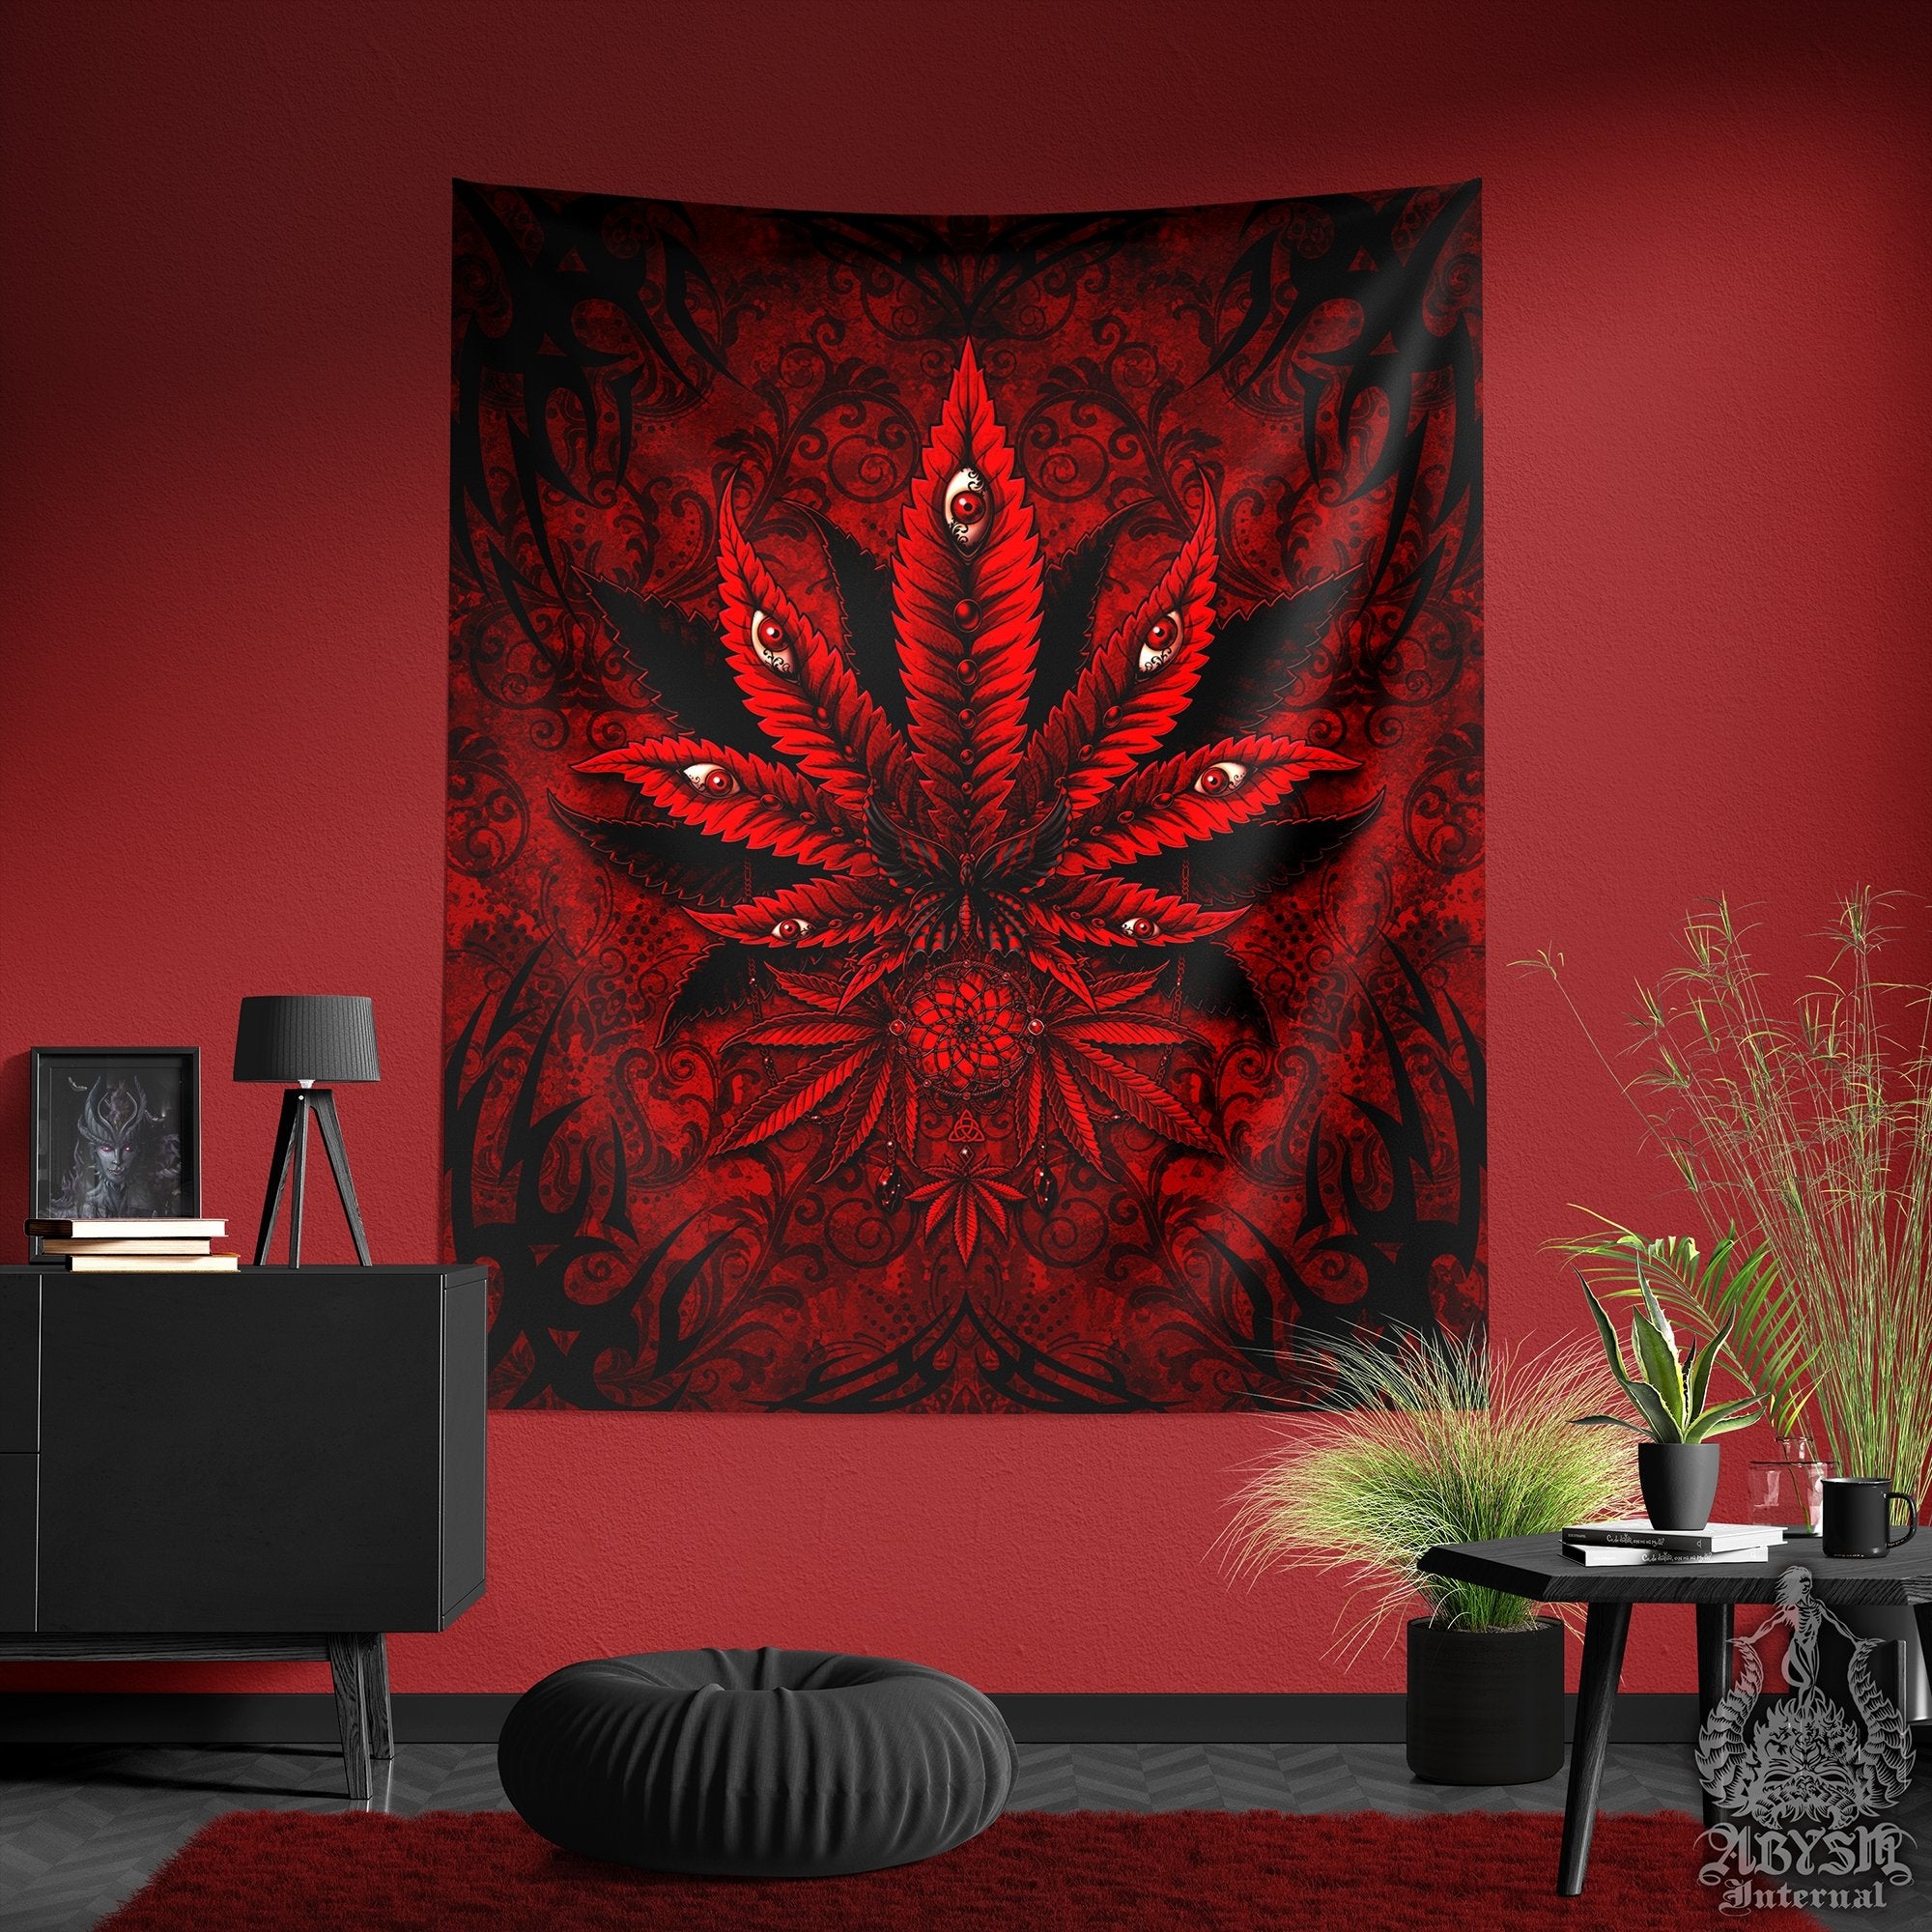 Weed Tapestry, Cannabis Shop Decor, Marijuana Wall Hanging, Bloody Gothic Home Decor, Goth Art Print, 420 Gift - Abysm Internal